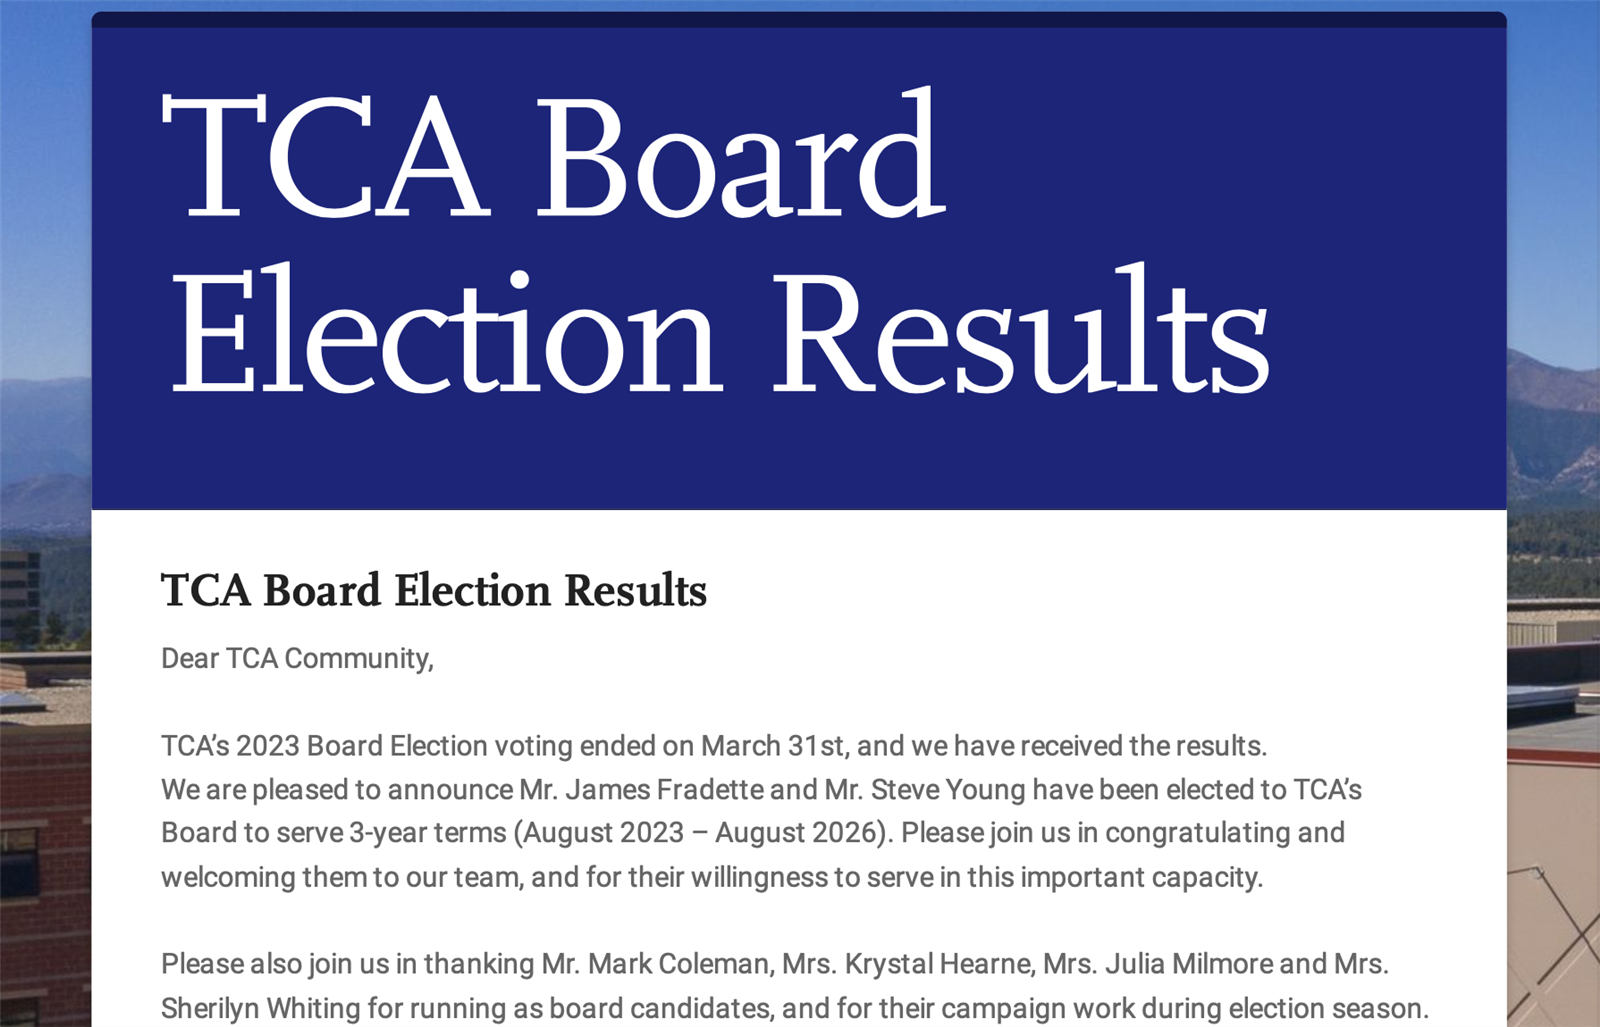  Image of the TCA Board Election Results Email